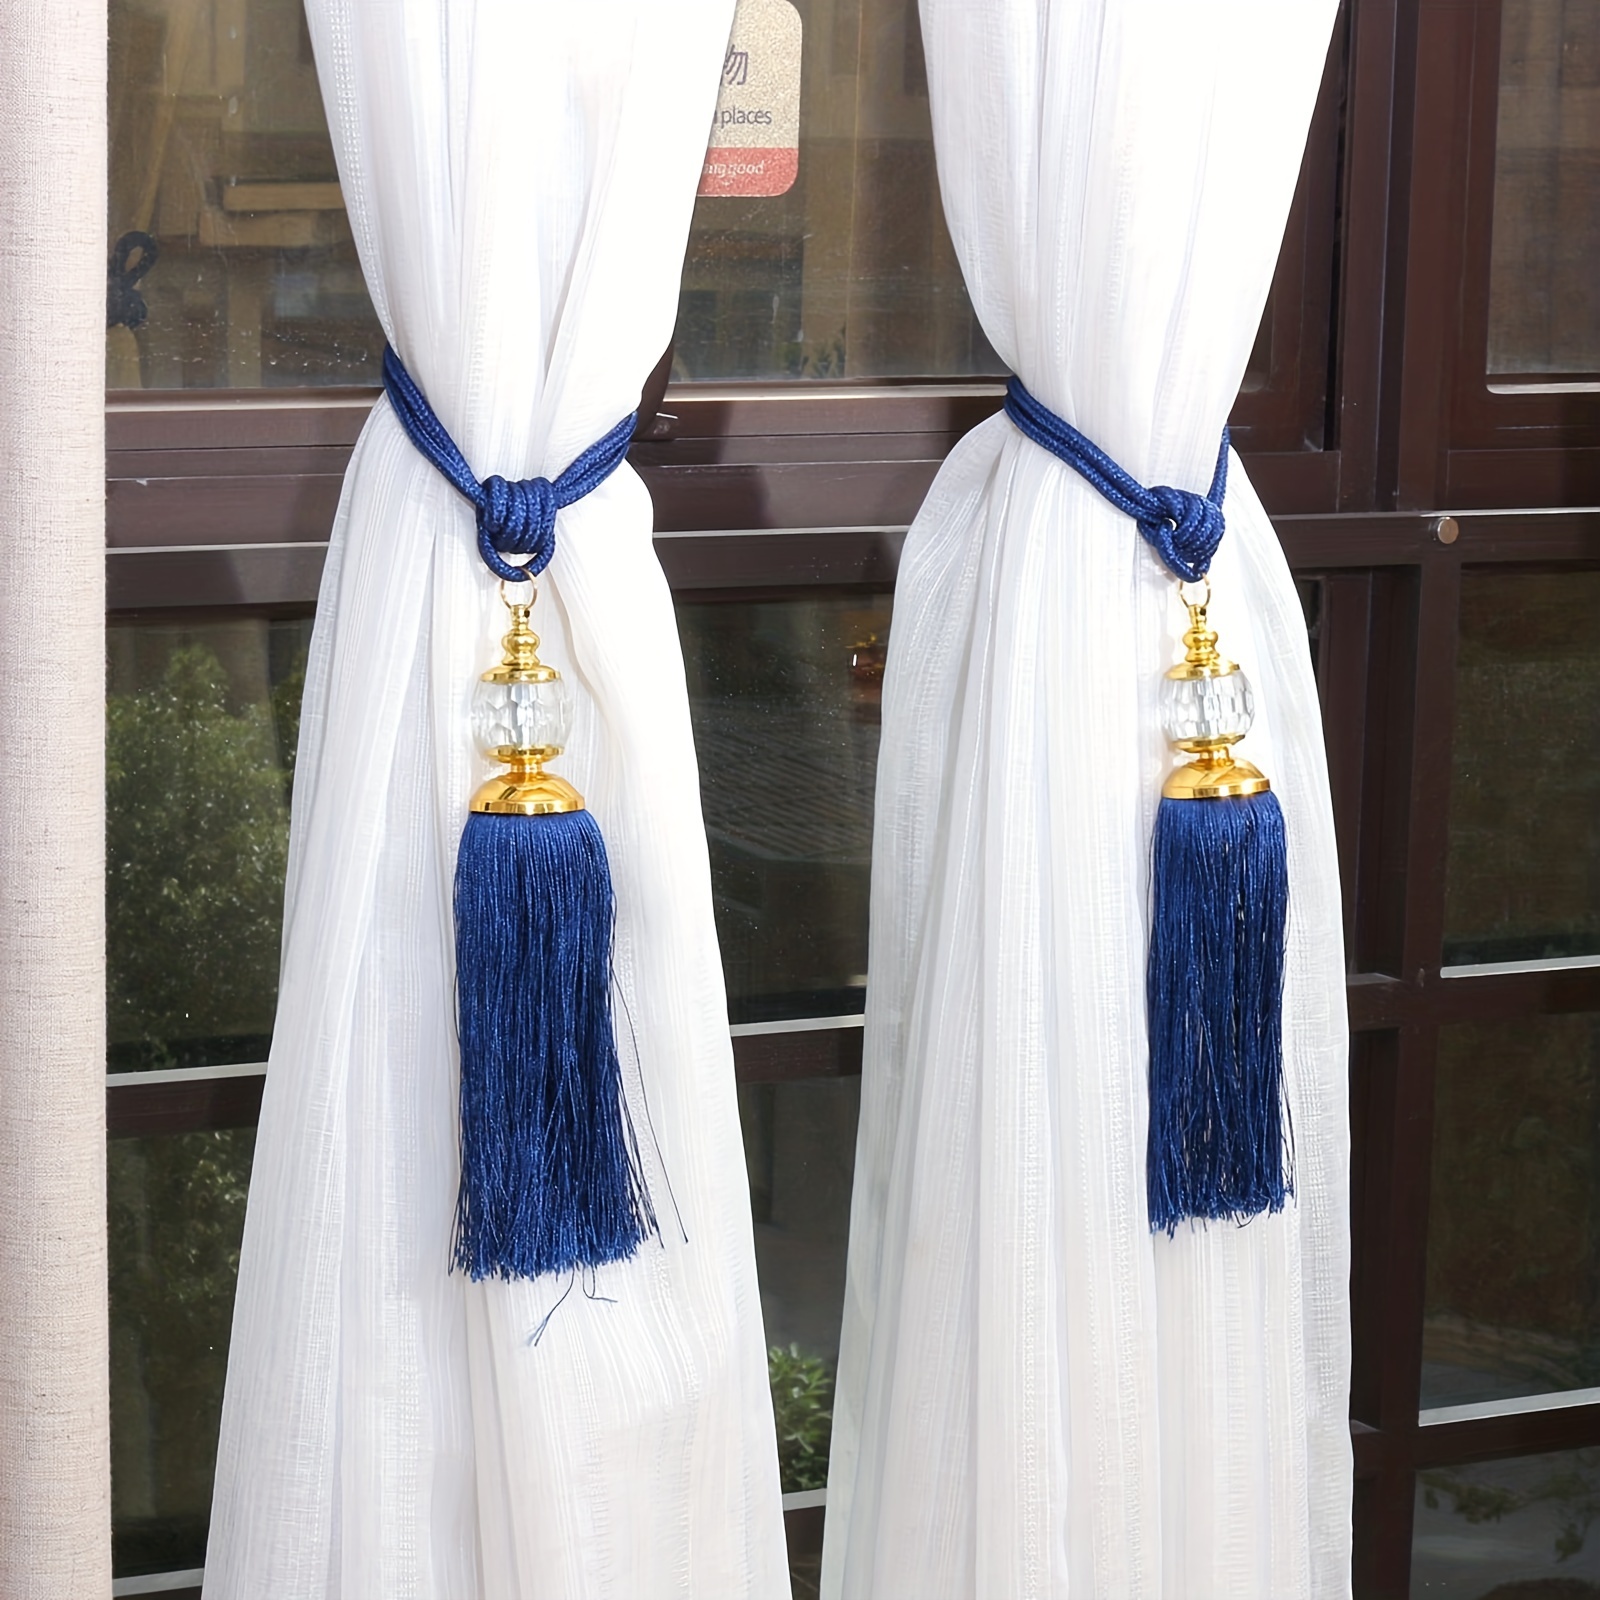 Pair of Large Gold Tassels with Twisted Rope Design Drape/Curtain